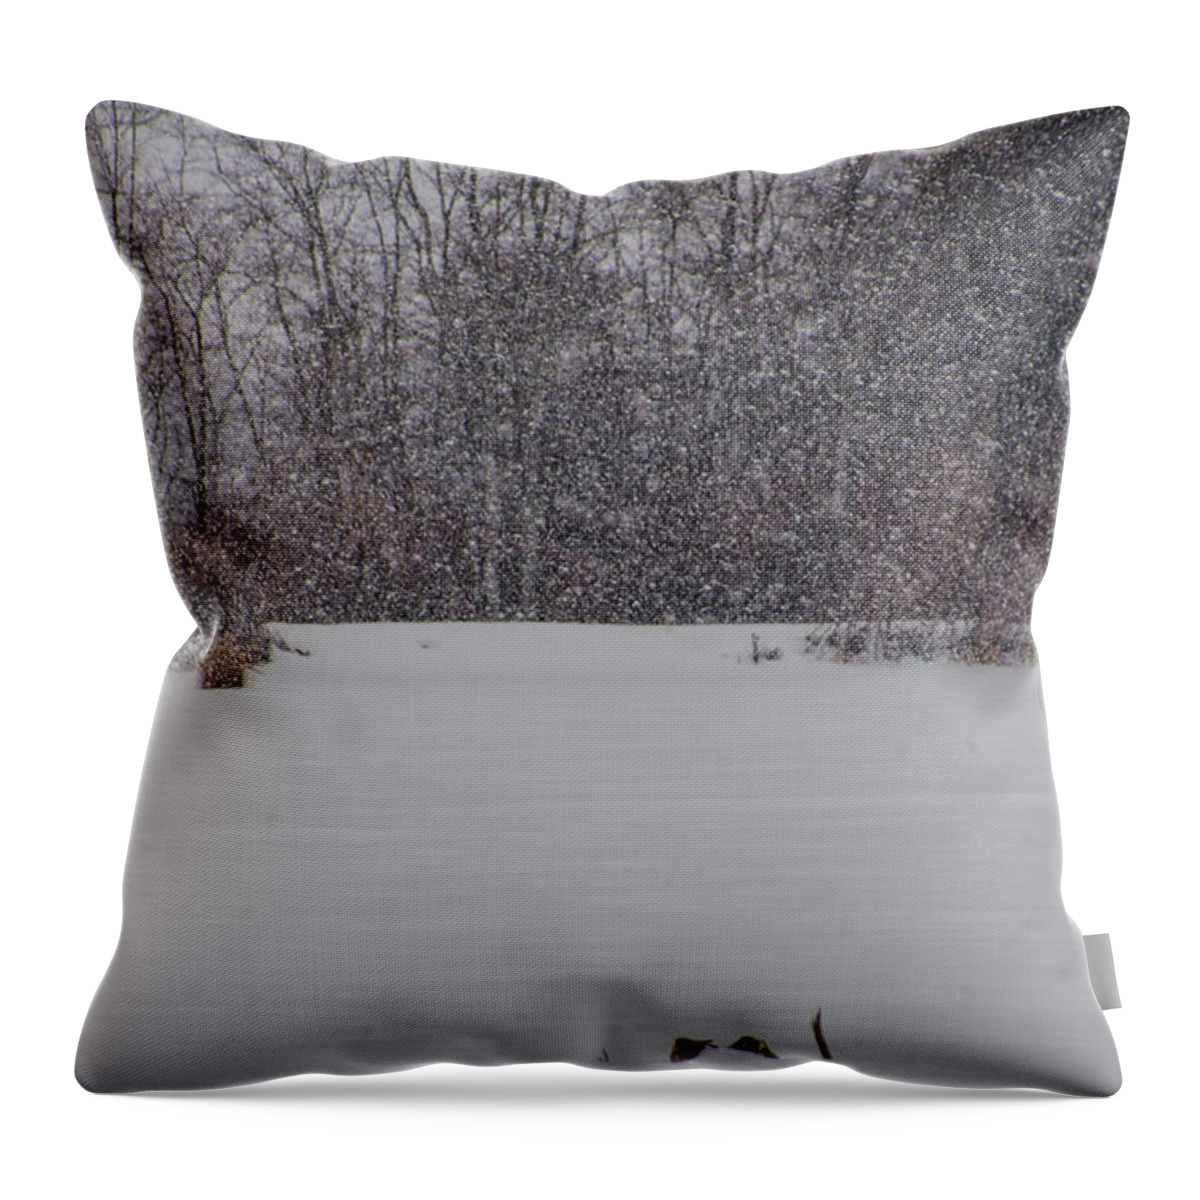 Canada Geese Throw Pillow featuring the photograph Canada Geese During a Snowfall by Beth Venner